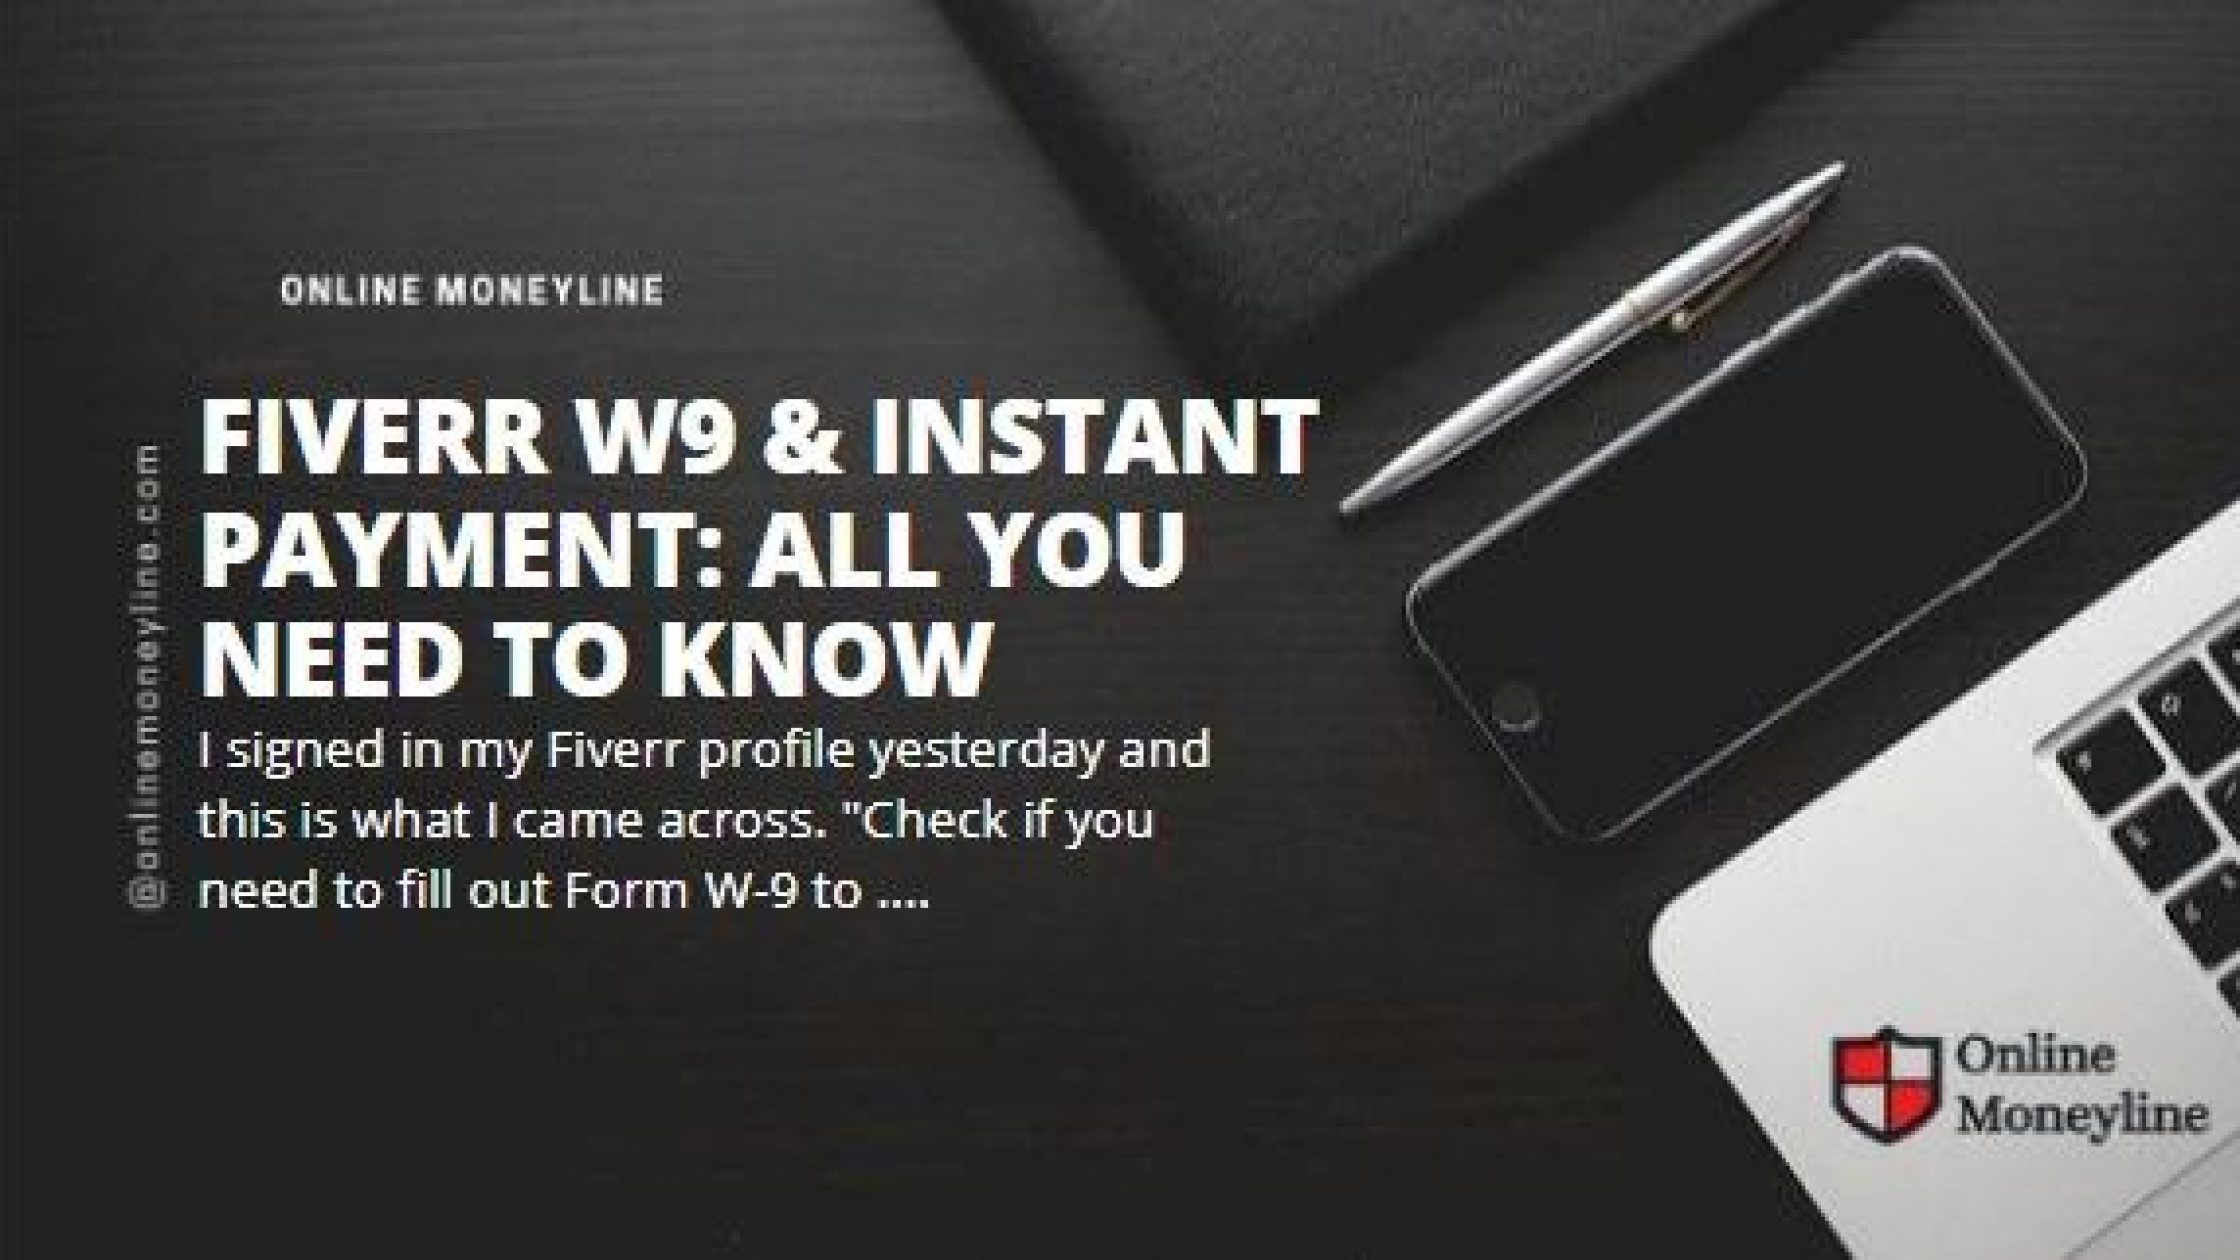 Fiverr W9 & Instant payment: All You Need To Know